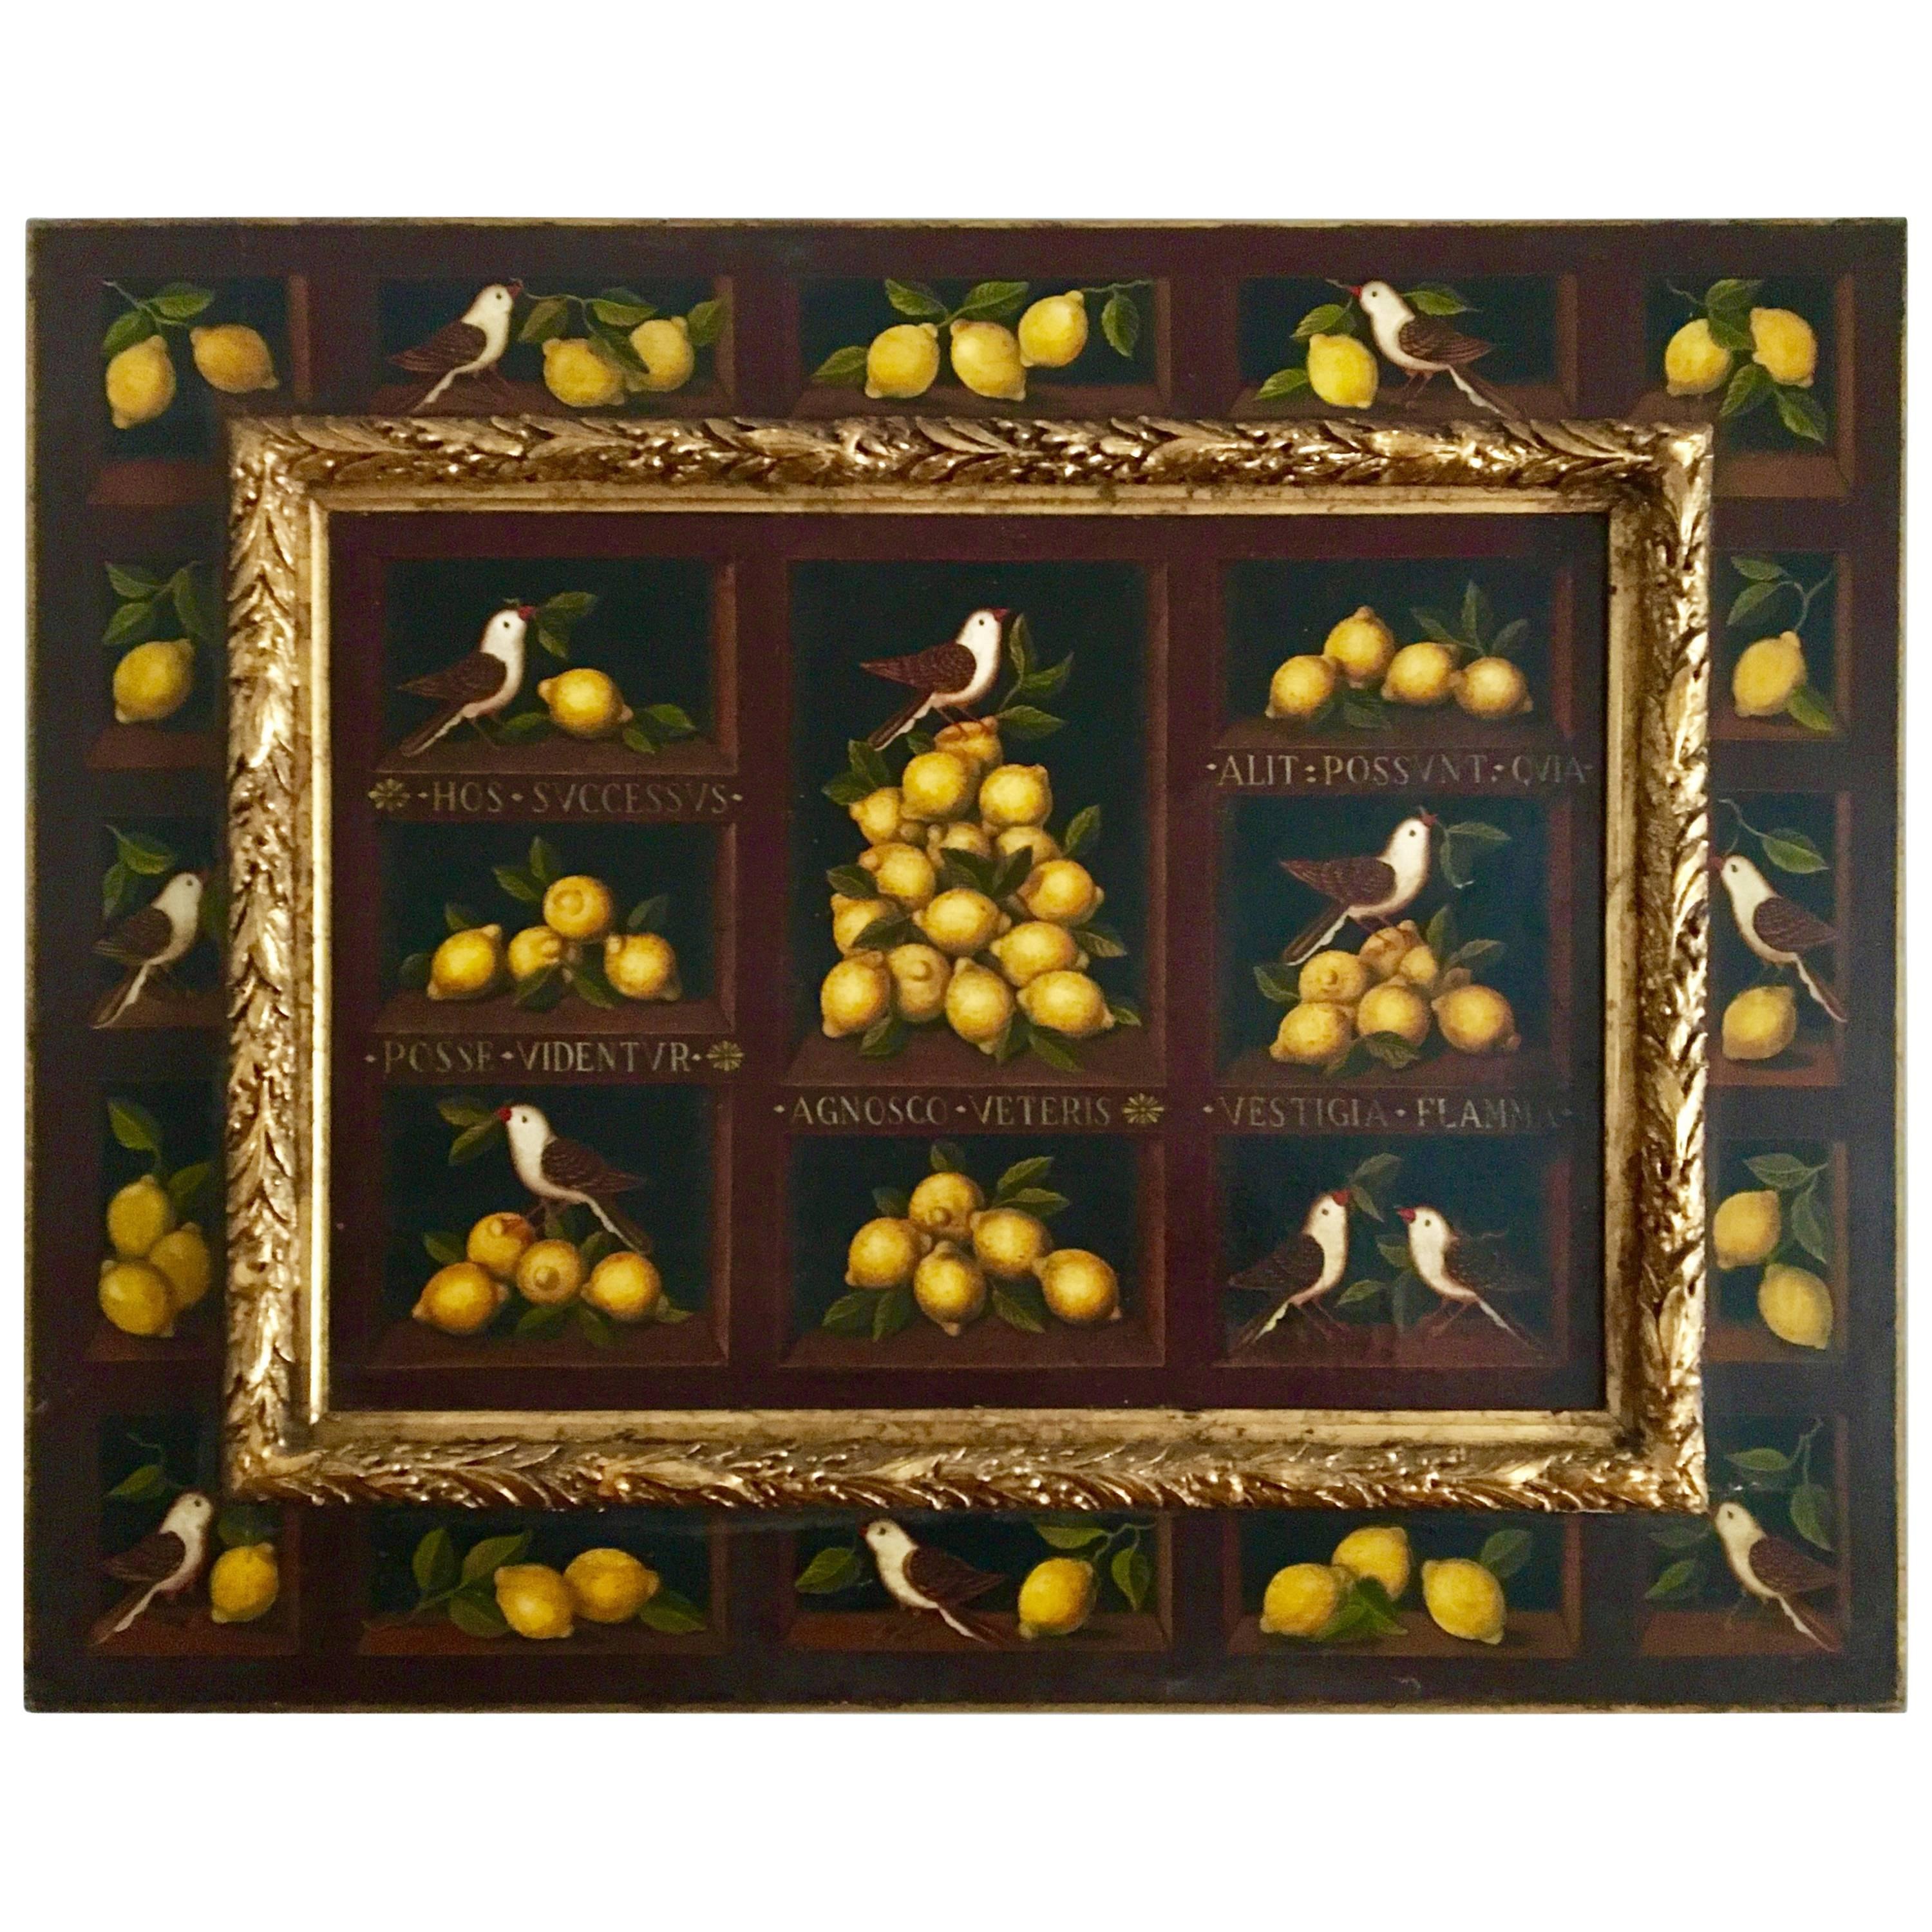 "Still Life of Birds and Lemons" Studio of Miguel Canals